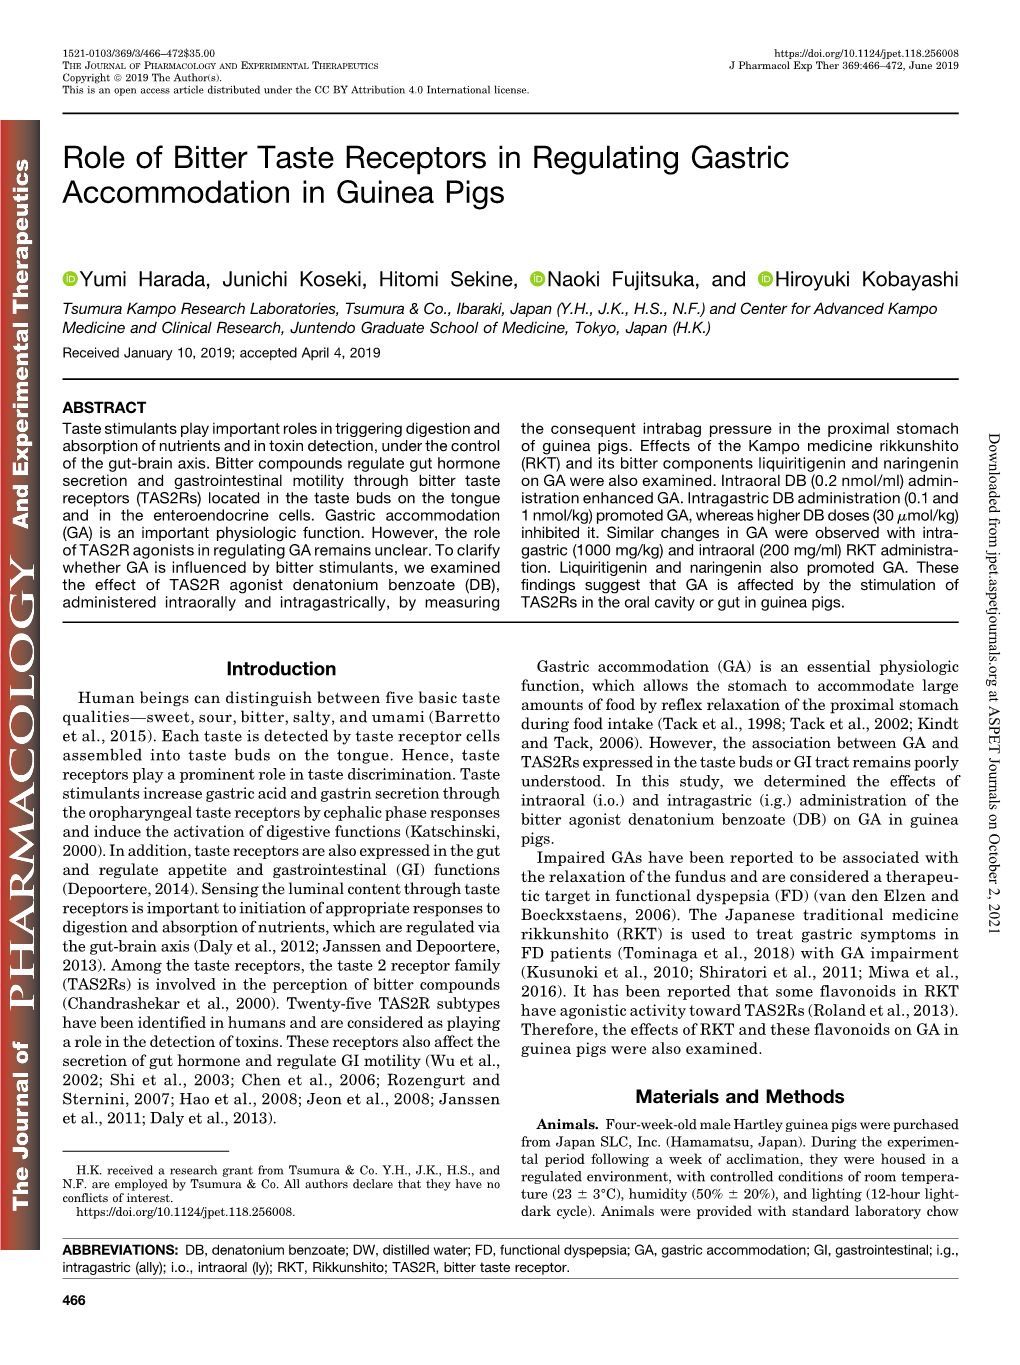 Role of Bitter Taste Receptors in Regulating Gastric Accommodation in Guinea Pigs